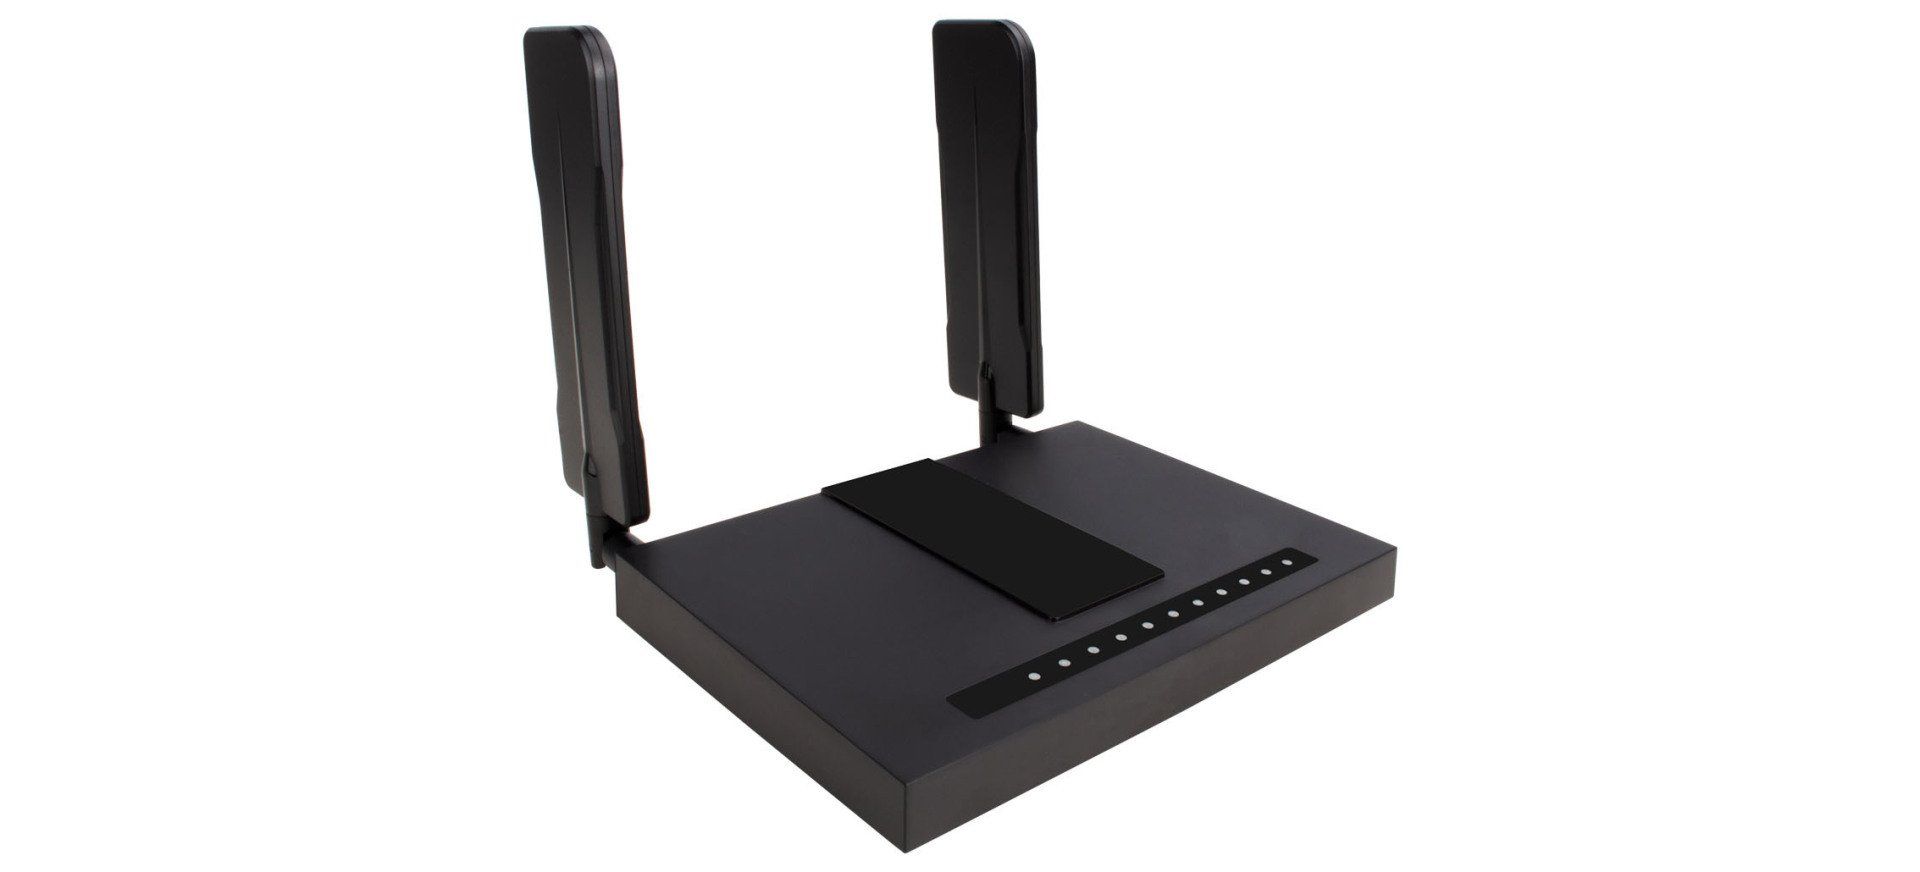 LTE520 4G-LTE/300Mbps Wireless VoIP Router